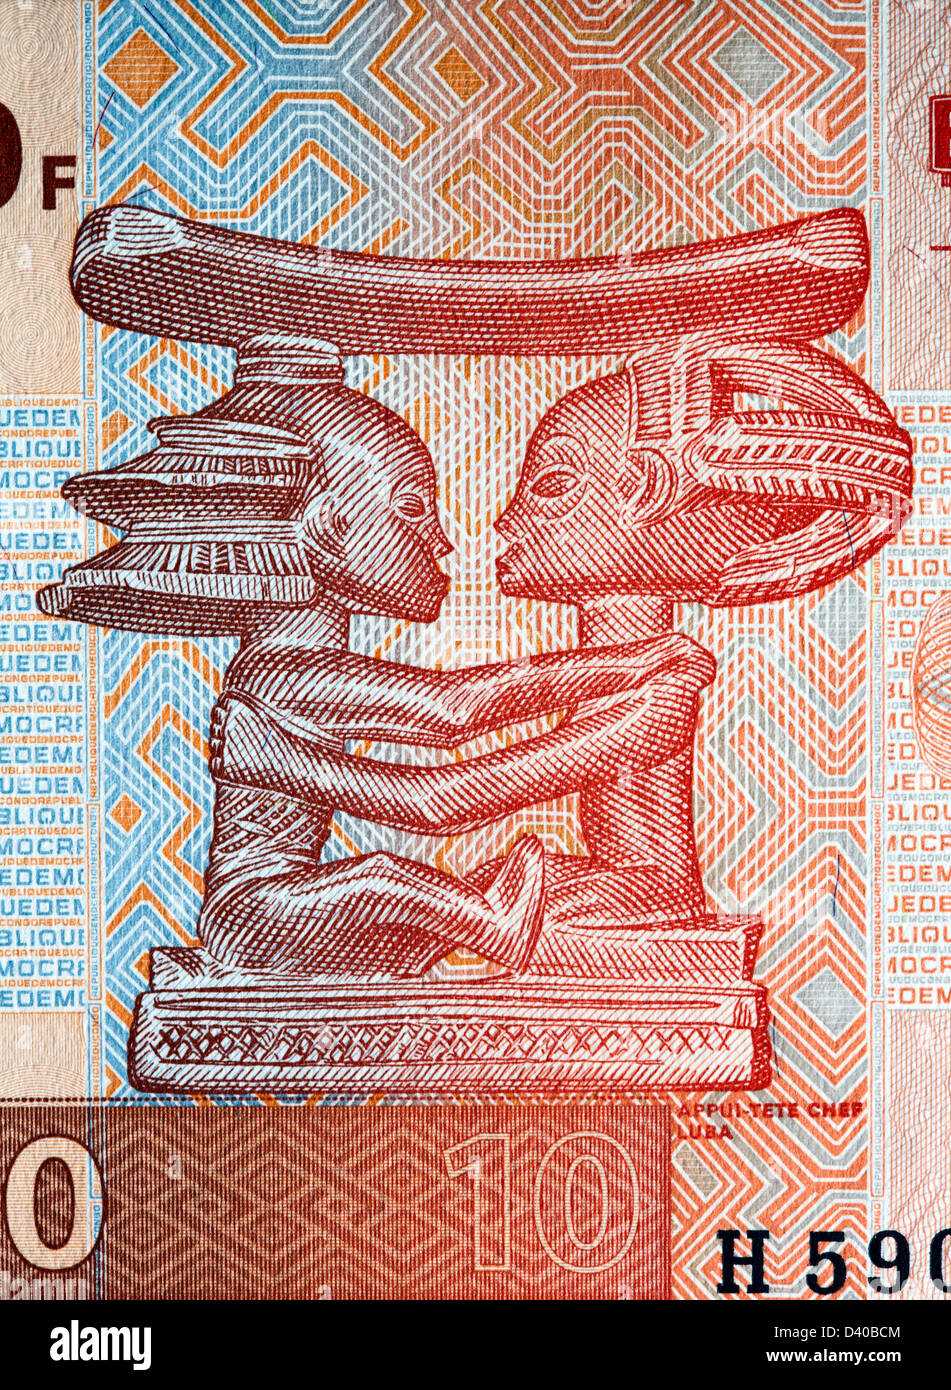 Tribal art from 10 Francs banknote, Congo, 2003 Stock Photo